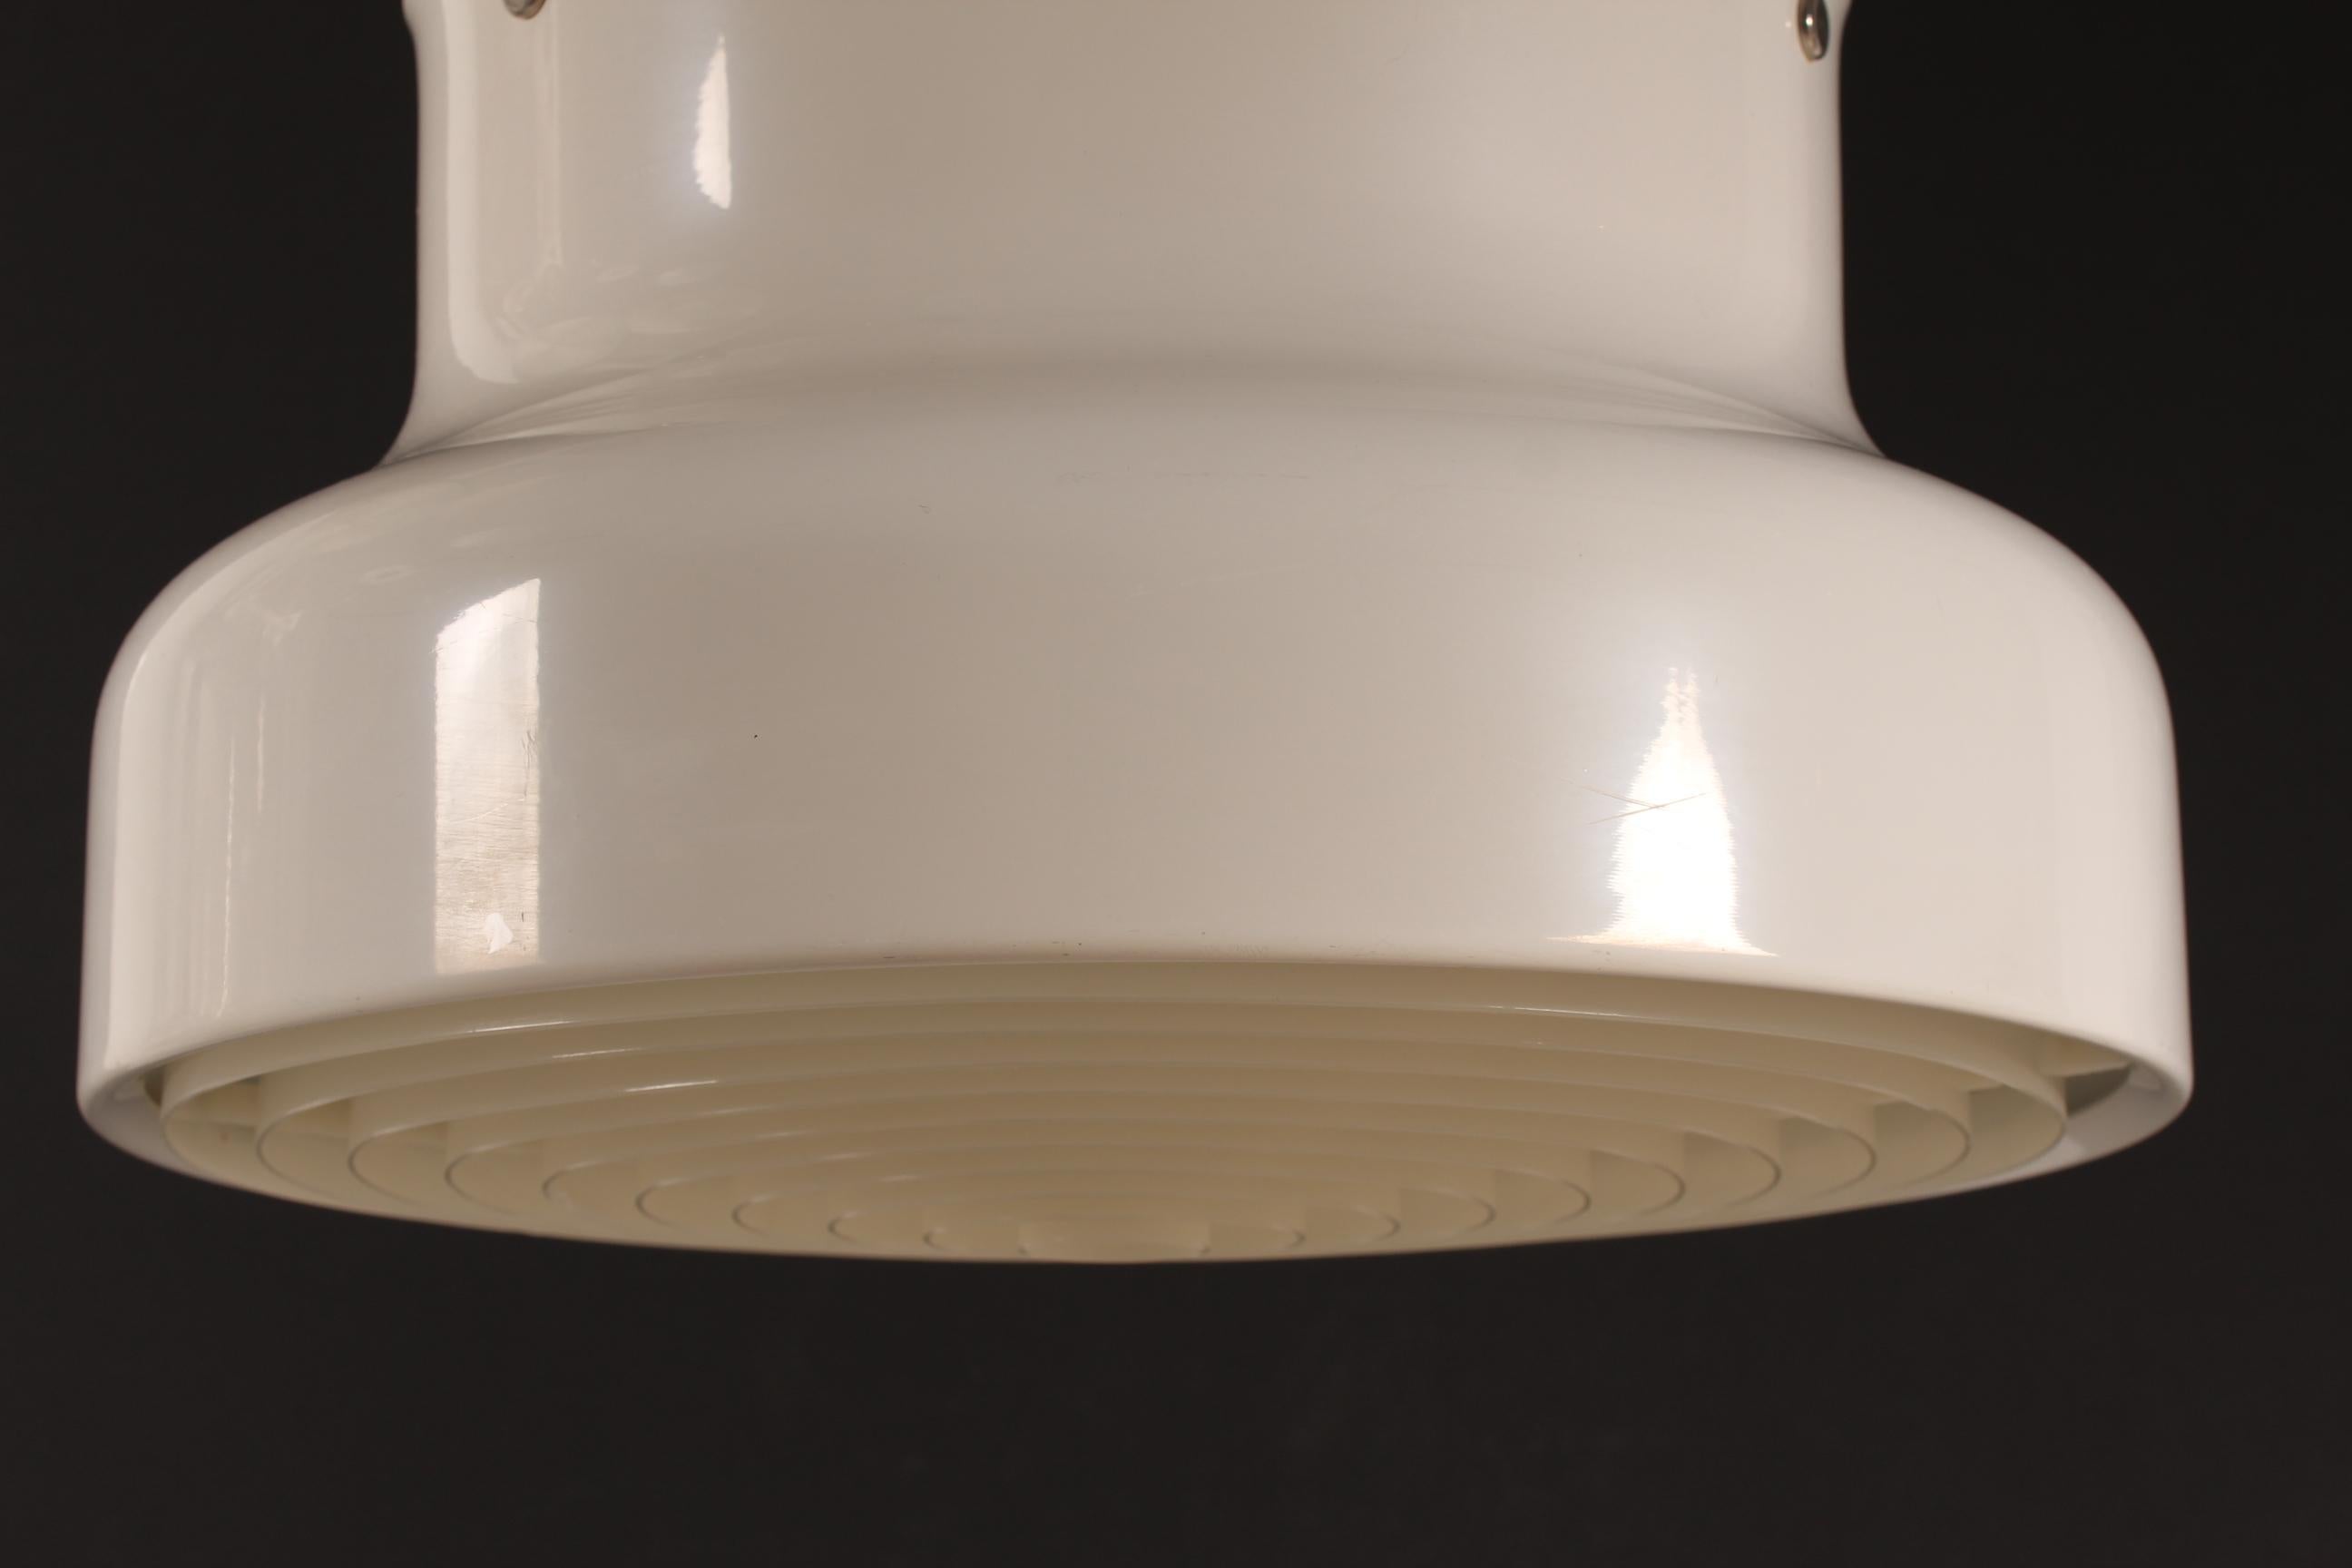 Large Anders Pehrsson Bumling ceiling lamp made by the Swedish lamp manufacturer Ateljé Lyktan in the 1970s.

The lamp is made of metal with white glossy lacquer and remains in very good condition with full function.
The plastic grill is also in